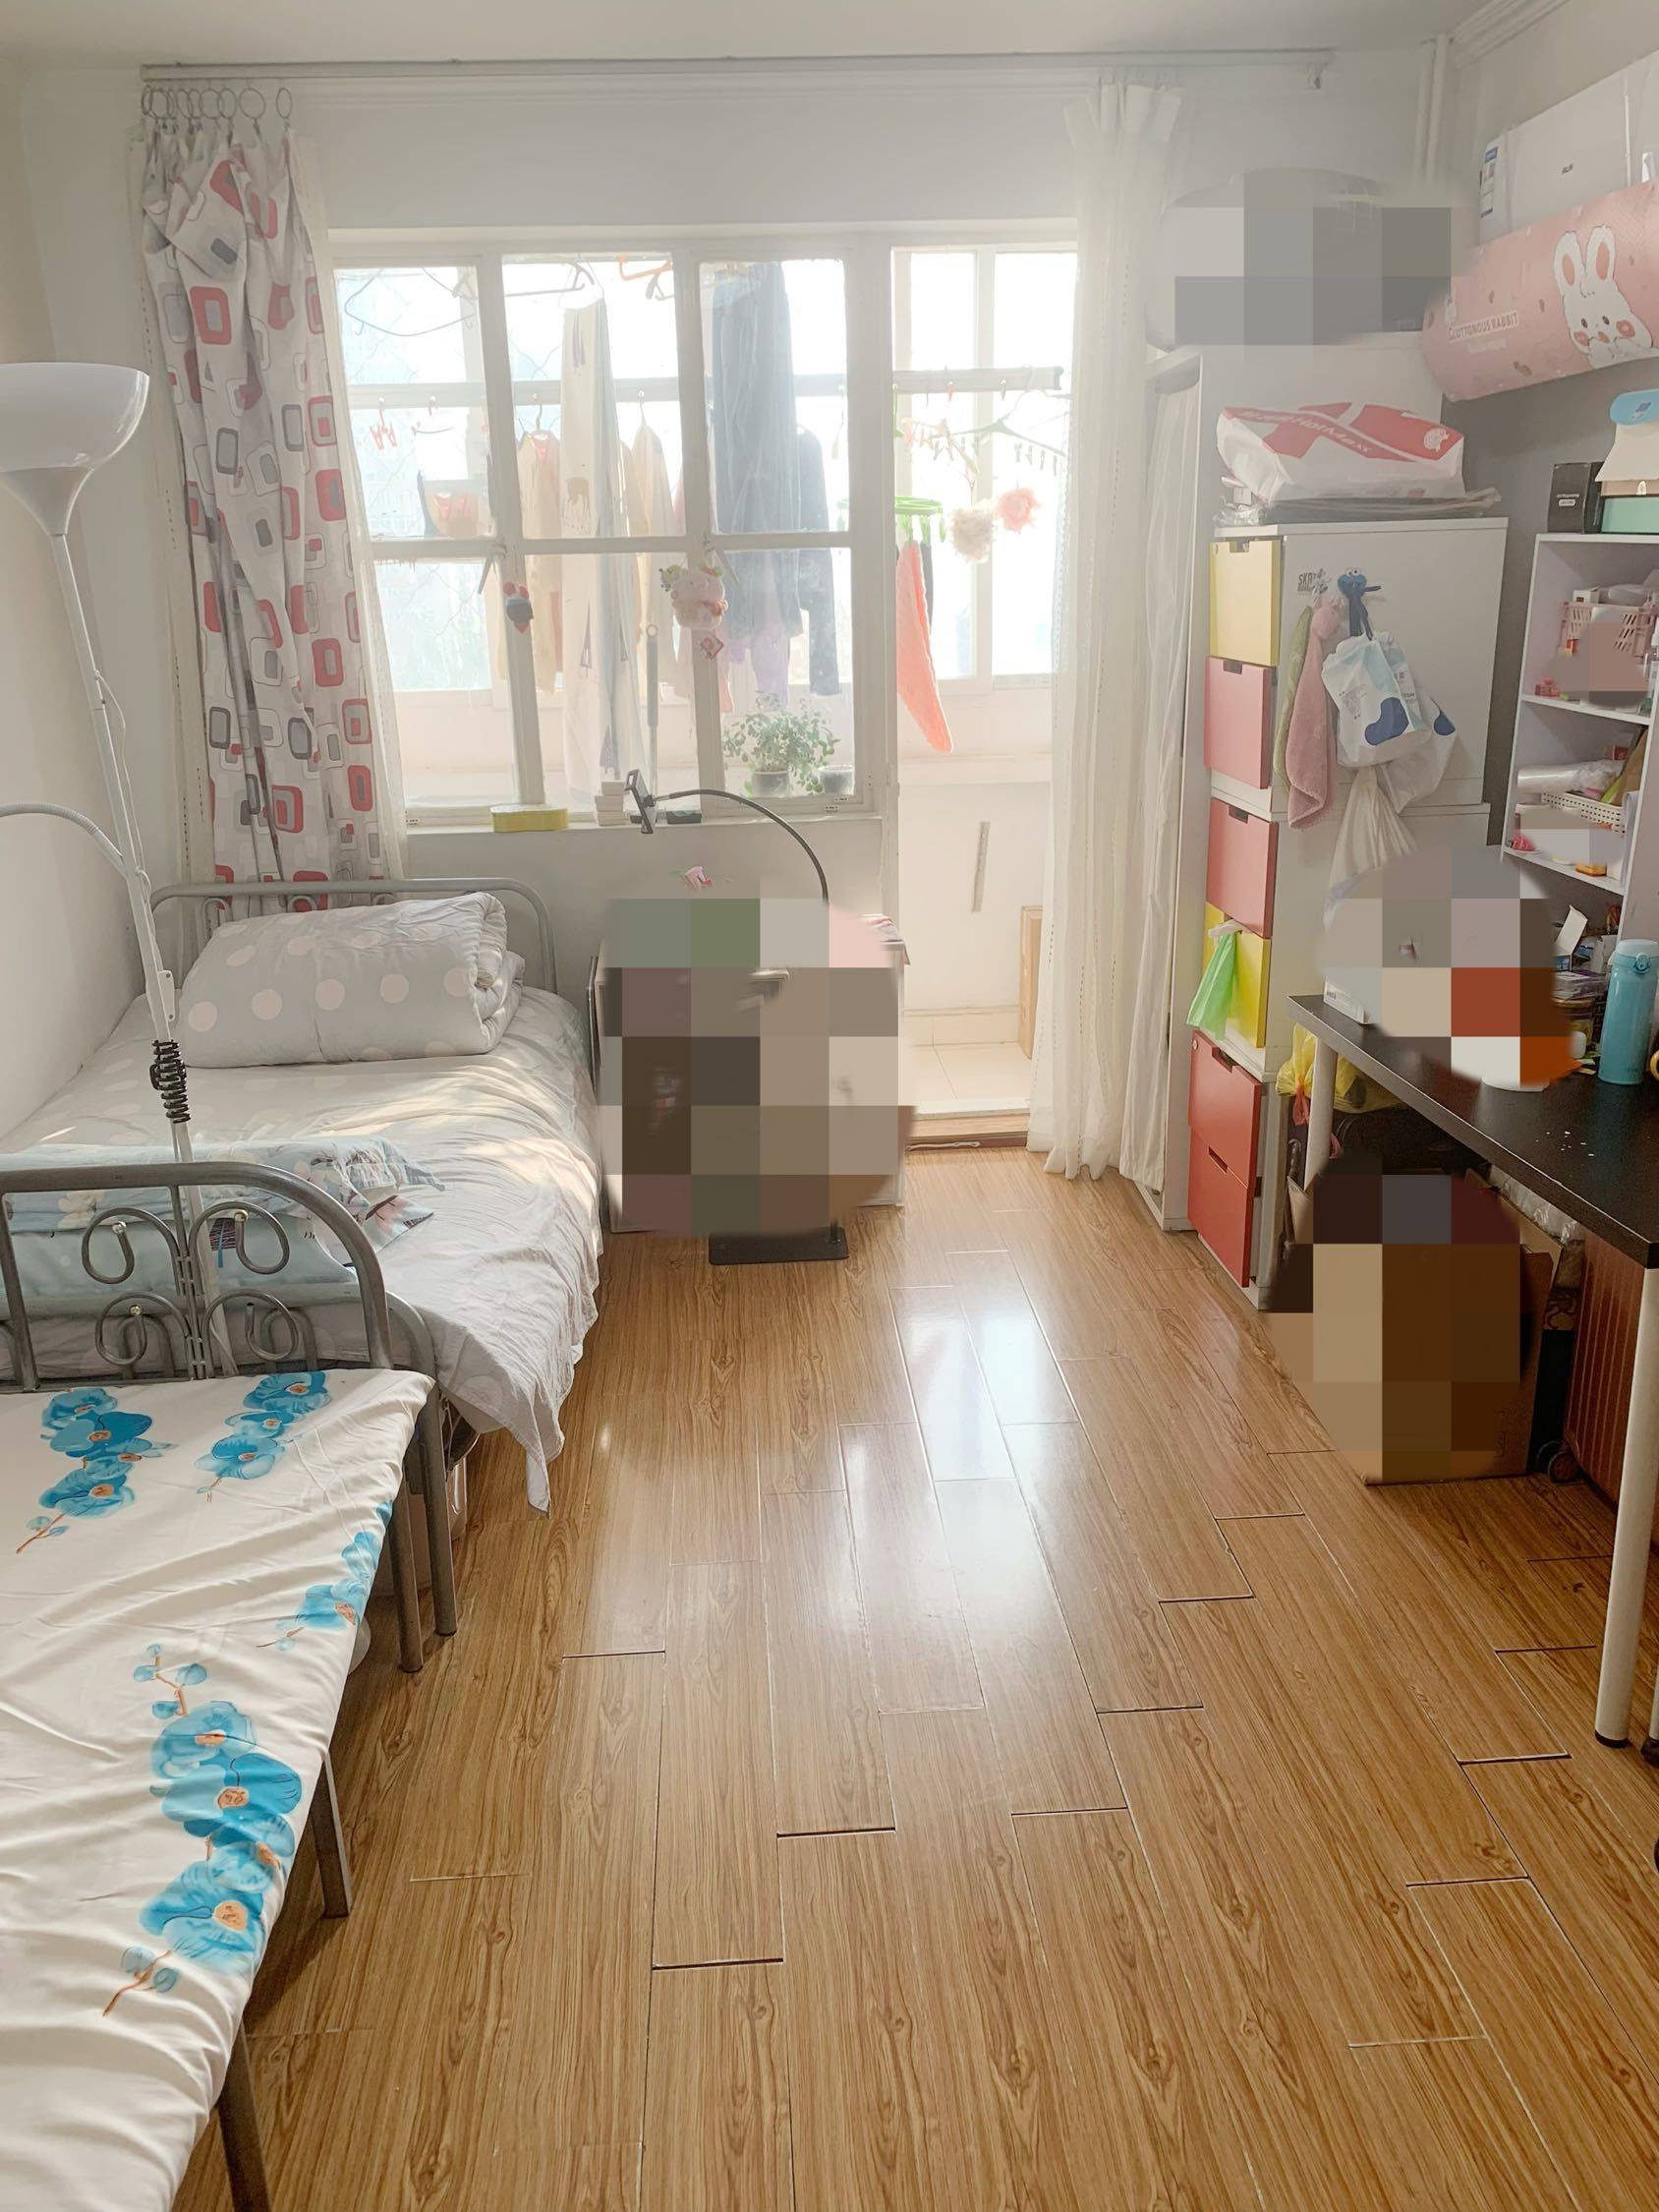 Beijing-Chaoyang-Cozy Home,Clean&Comfy,No Gender Limit,Chilled